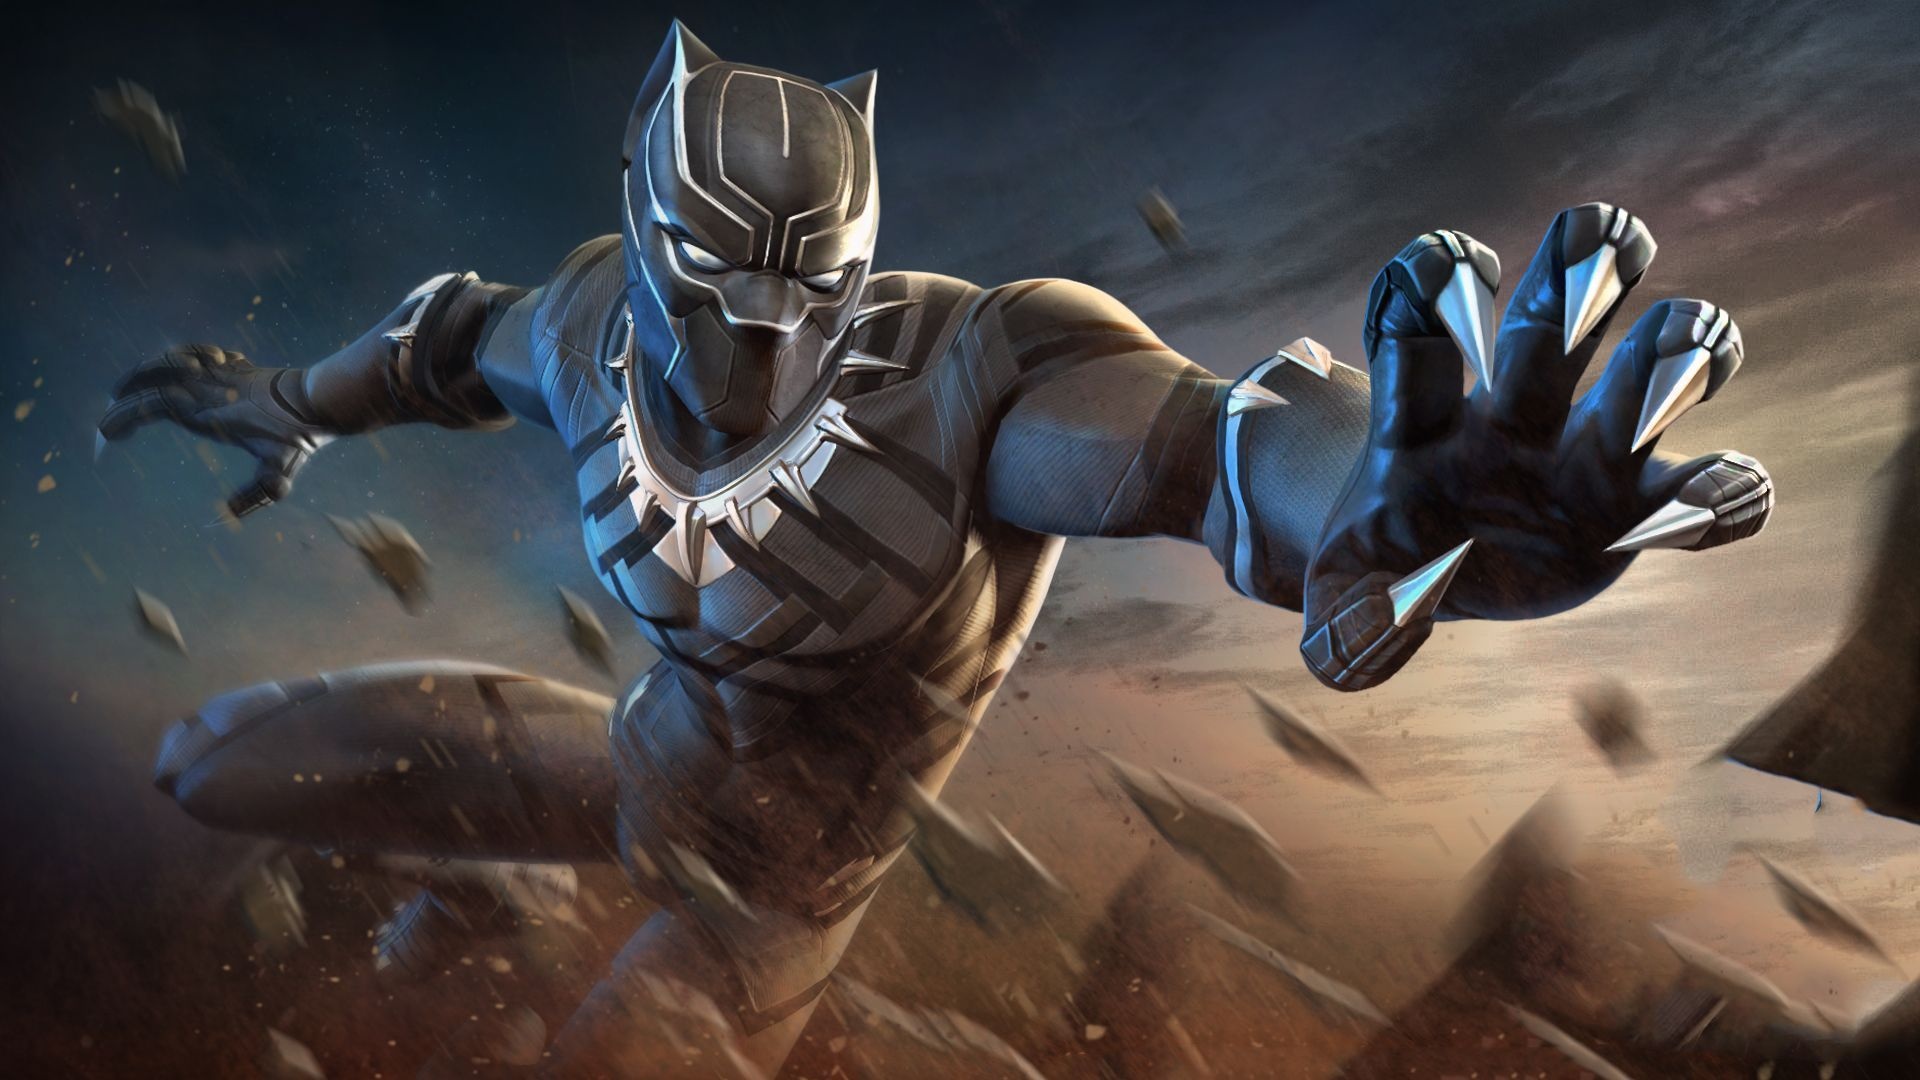 T'Challa, 4K HD wallpapers, Black Panther character, High-quality images, 1920x1080 Full HD Desktop